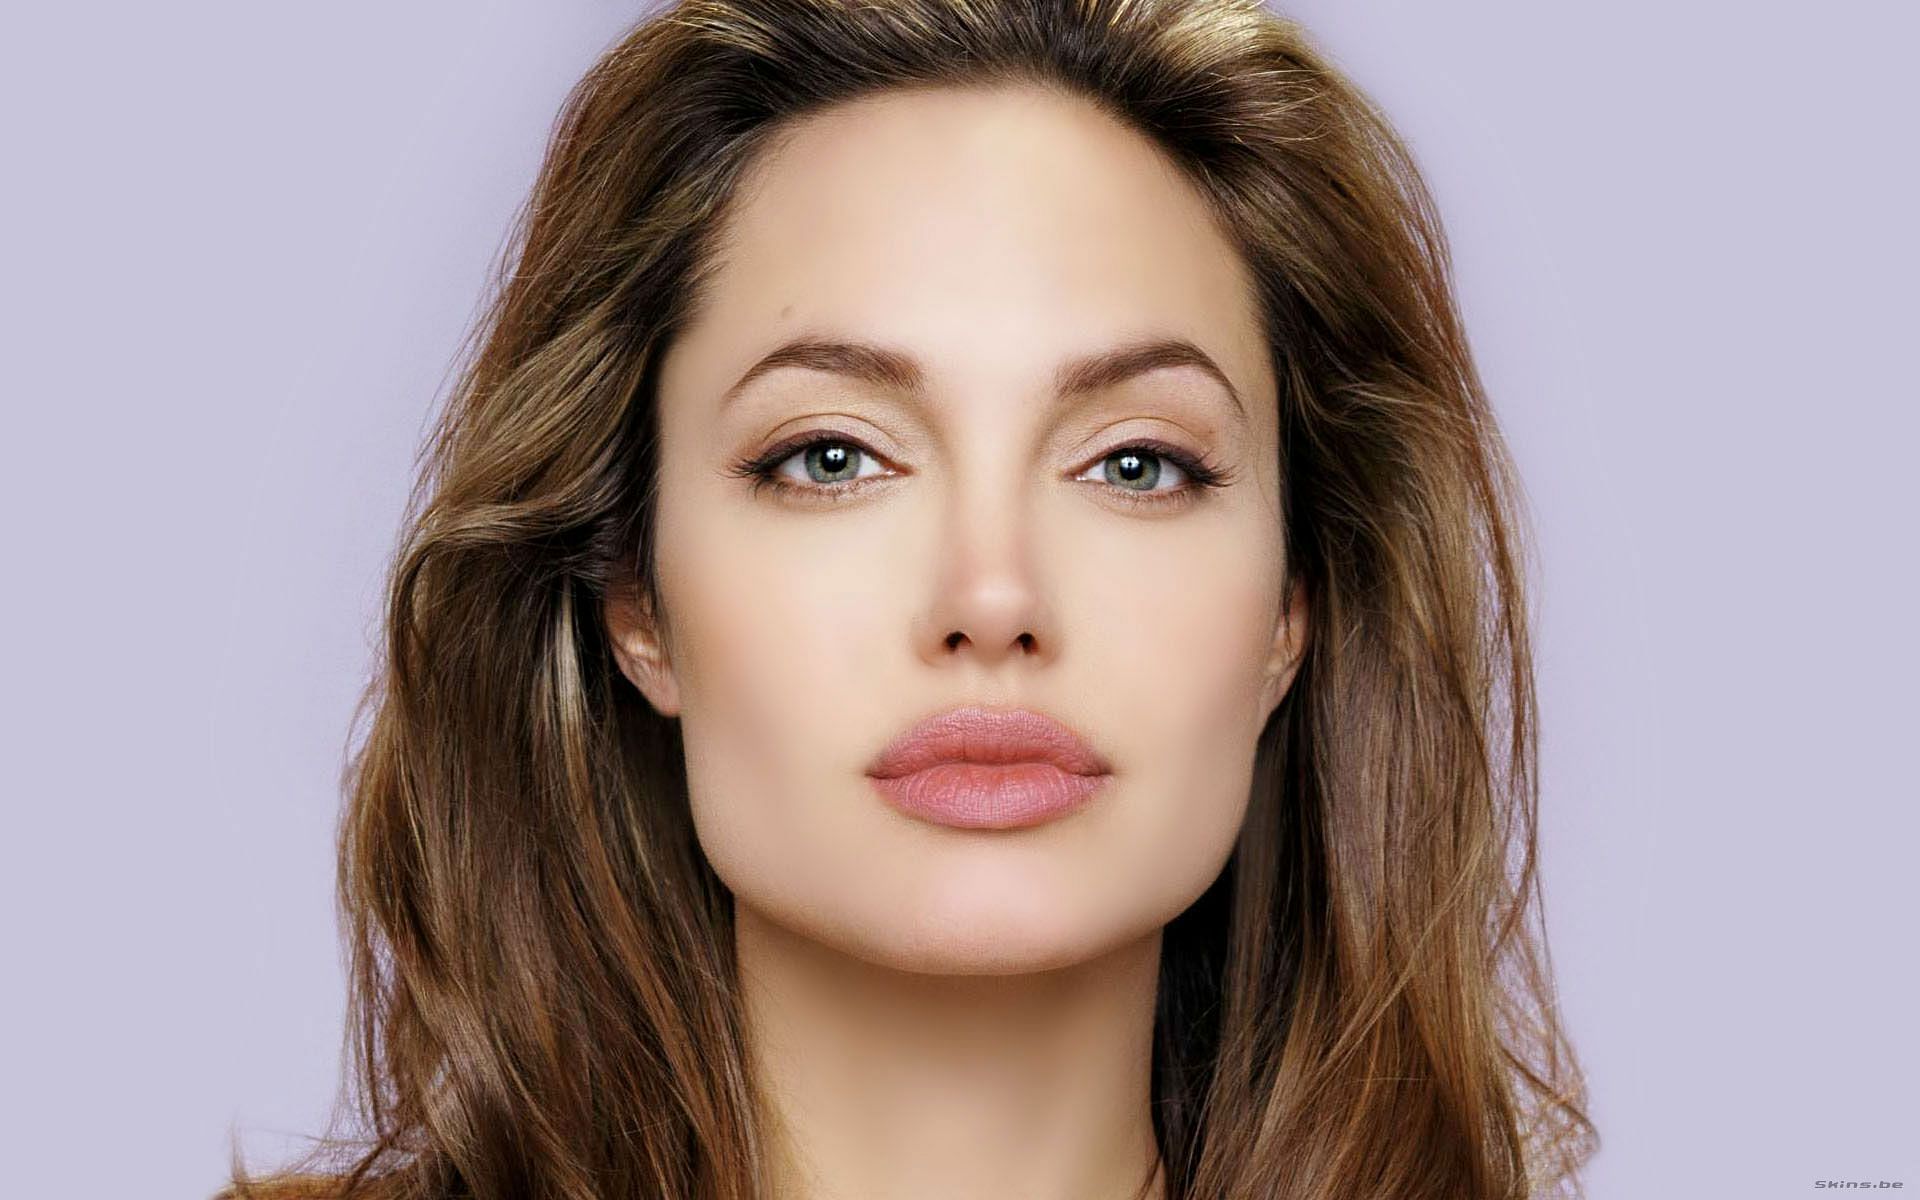 Angelina Jolie is big on healthy eating. (Image credits: Wallpaper Abyss)